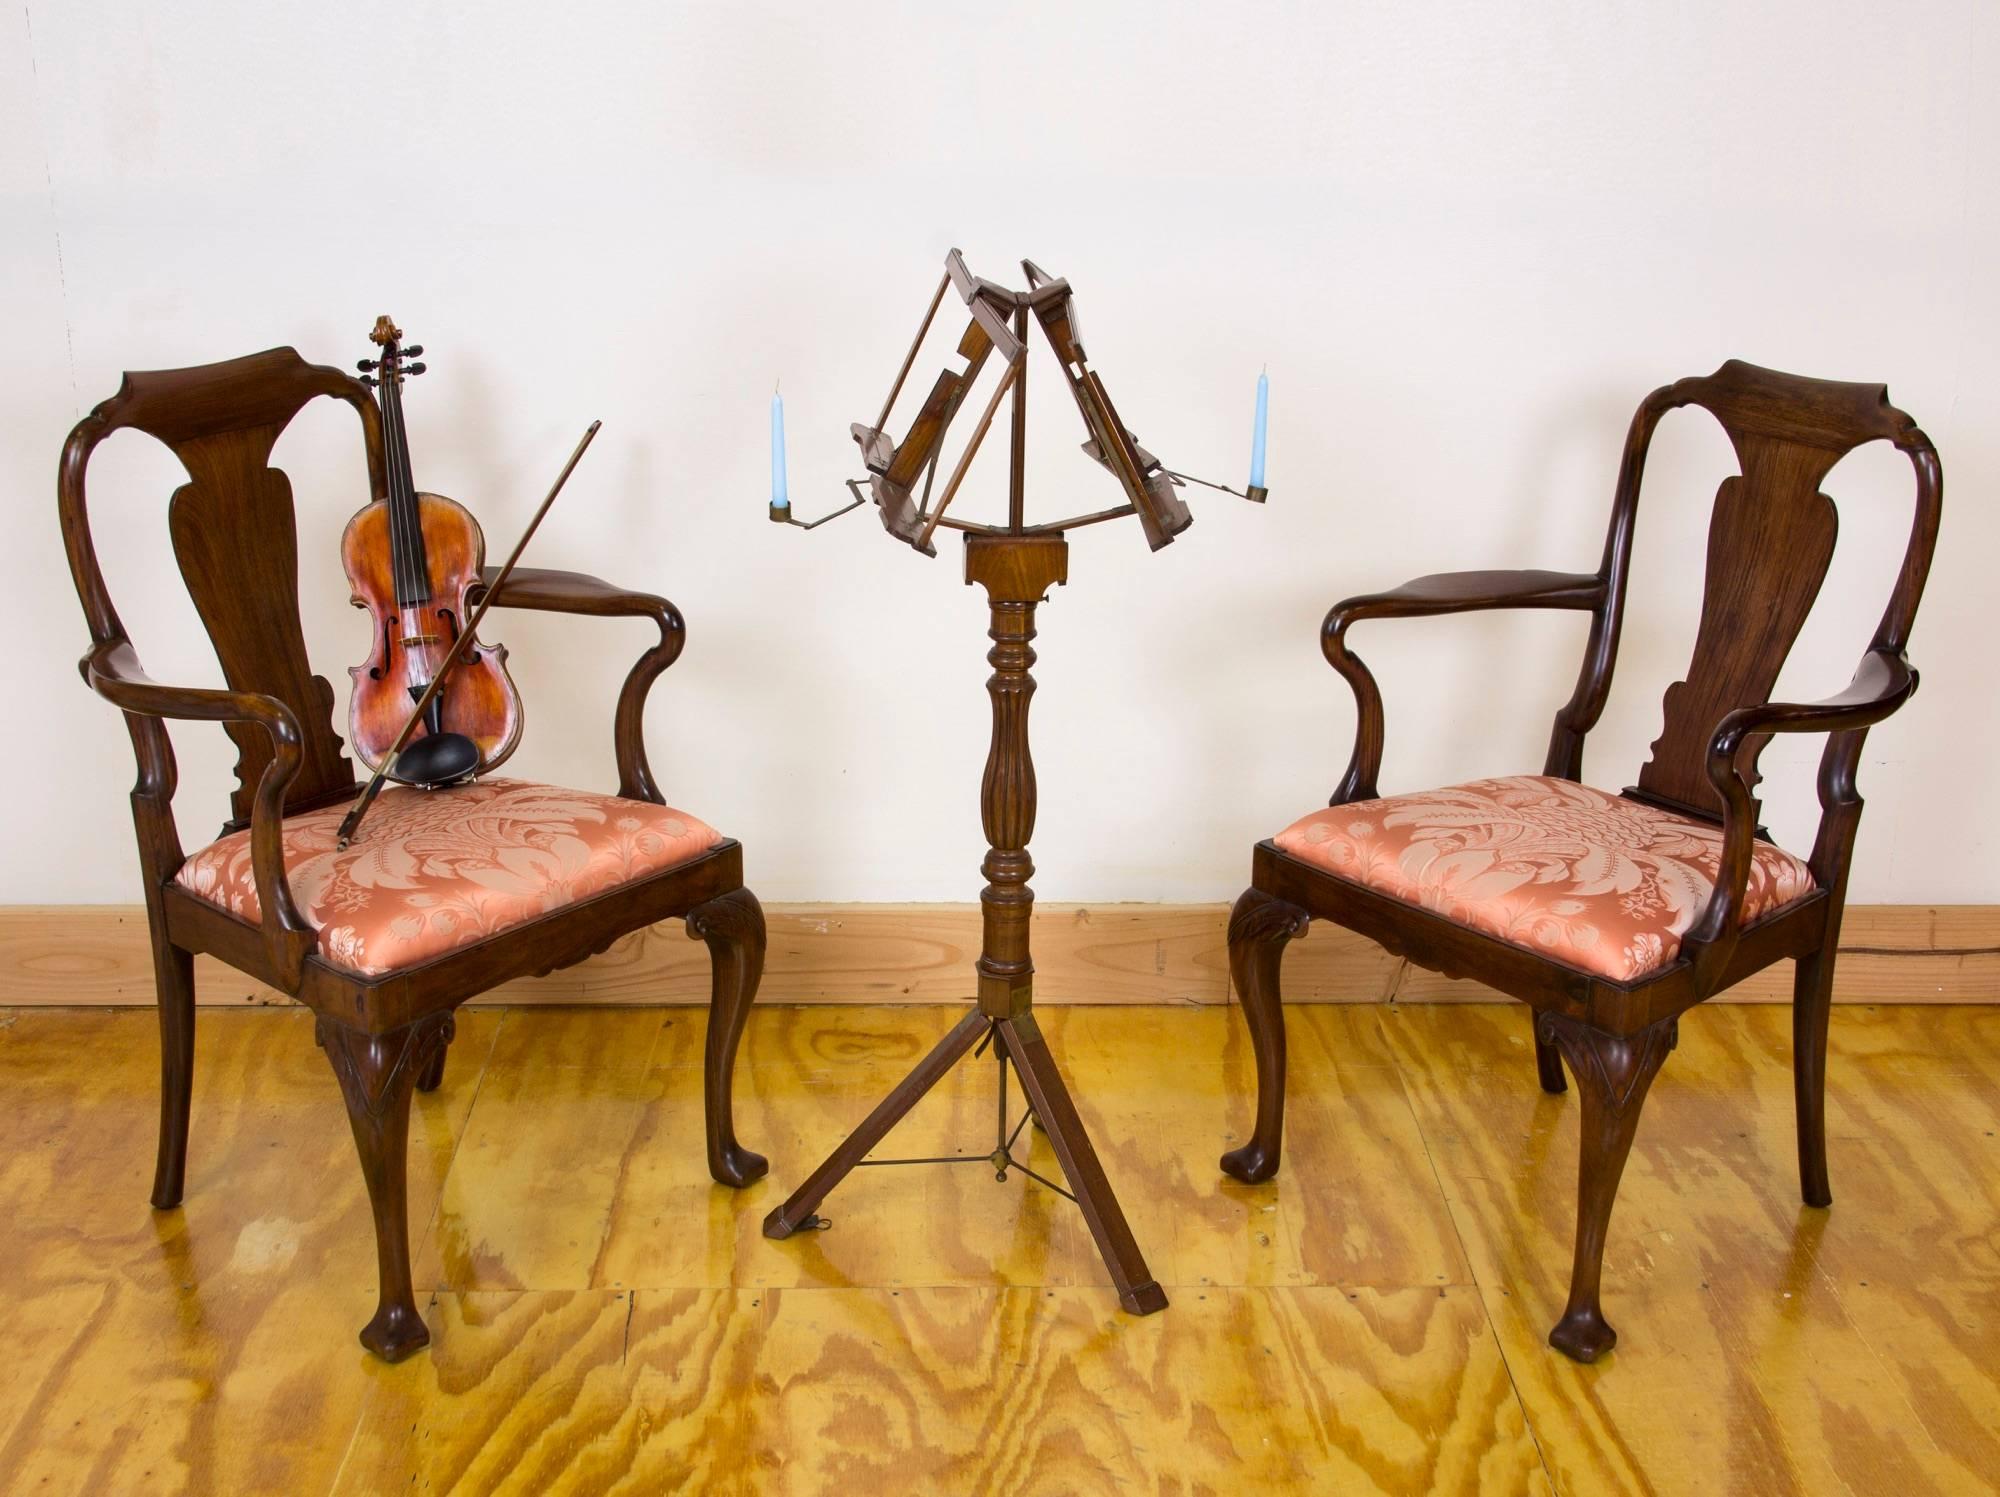 This has got to be the ultimate in a portable music stand. Note how it collapses to a single large baluster pole. It's an economy of space that's built like a watch. A review of the detailed images will show that the integration of carved elements